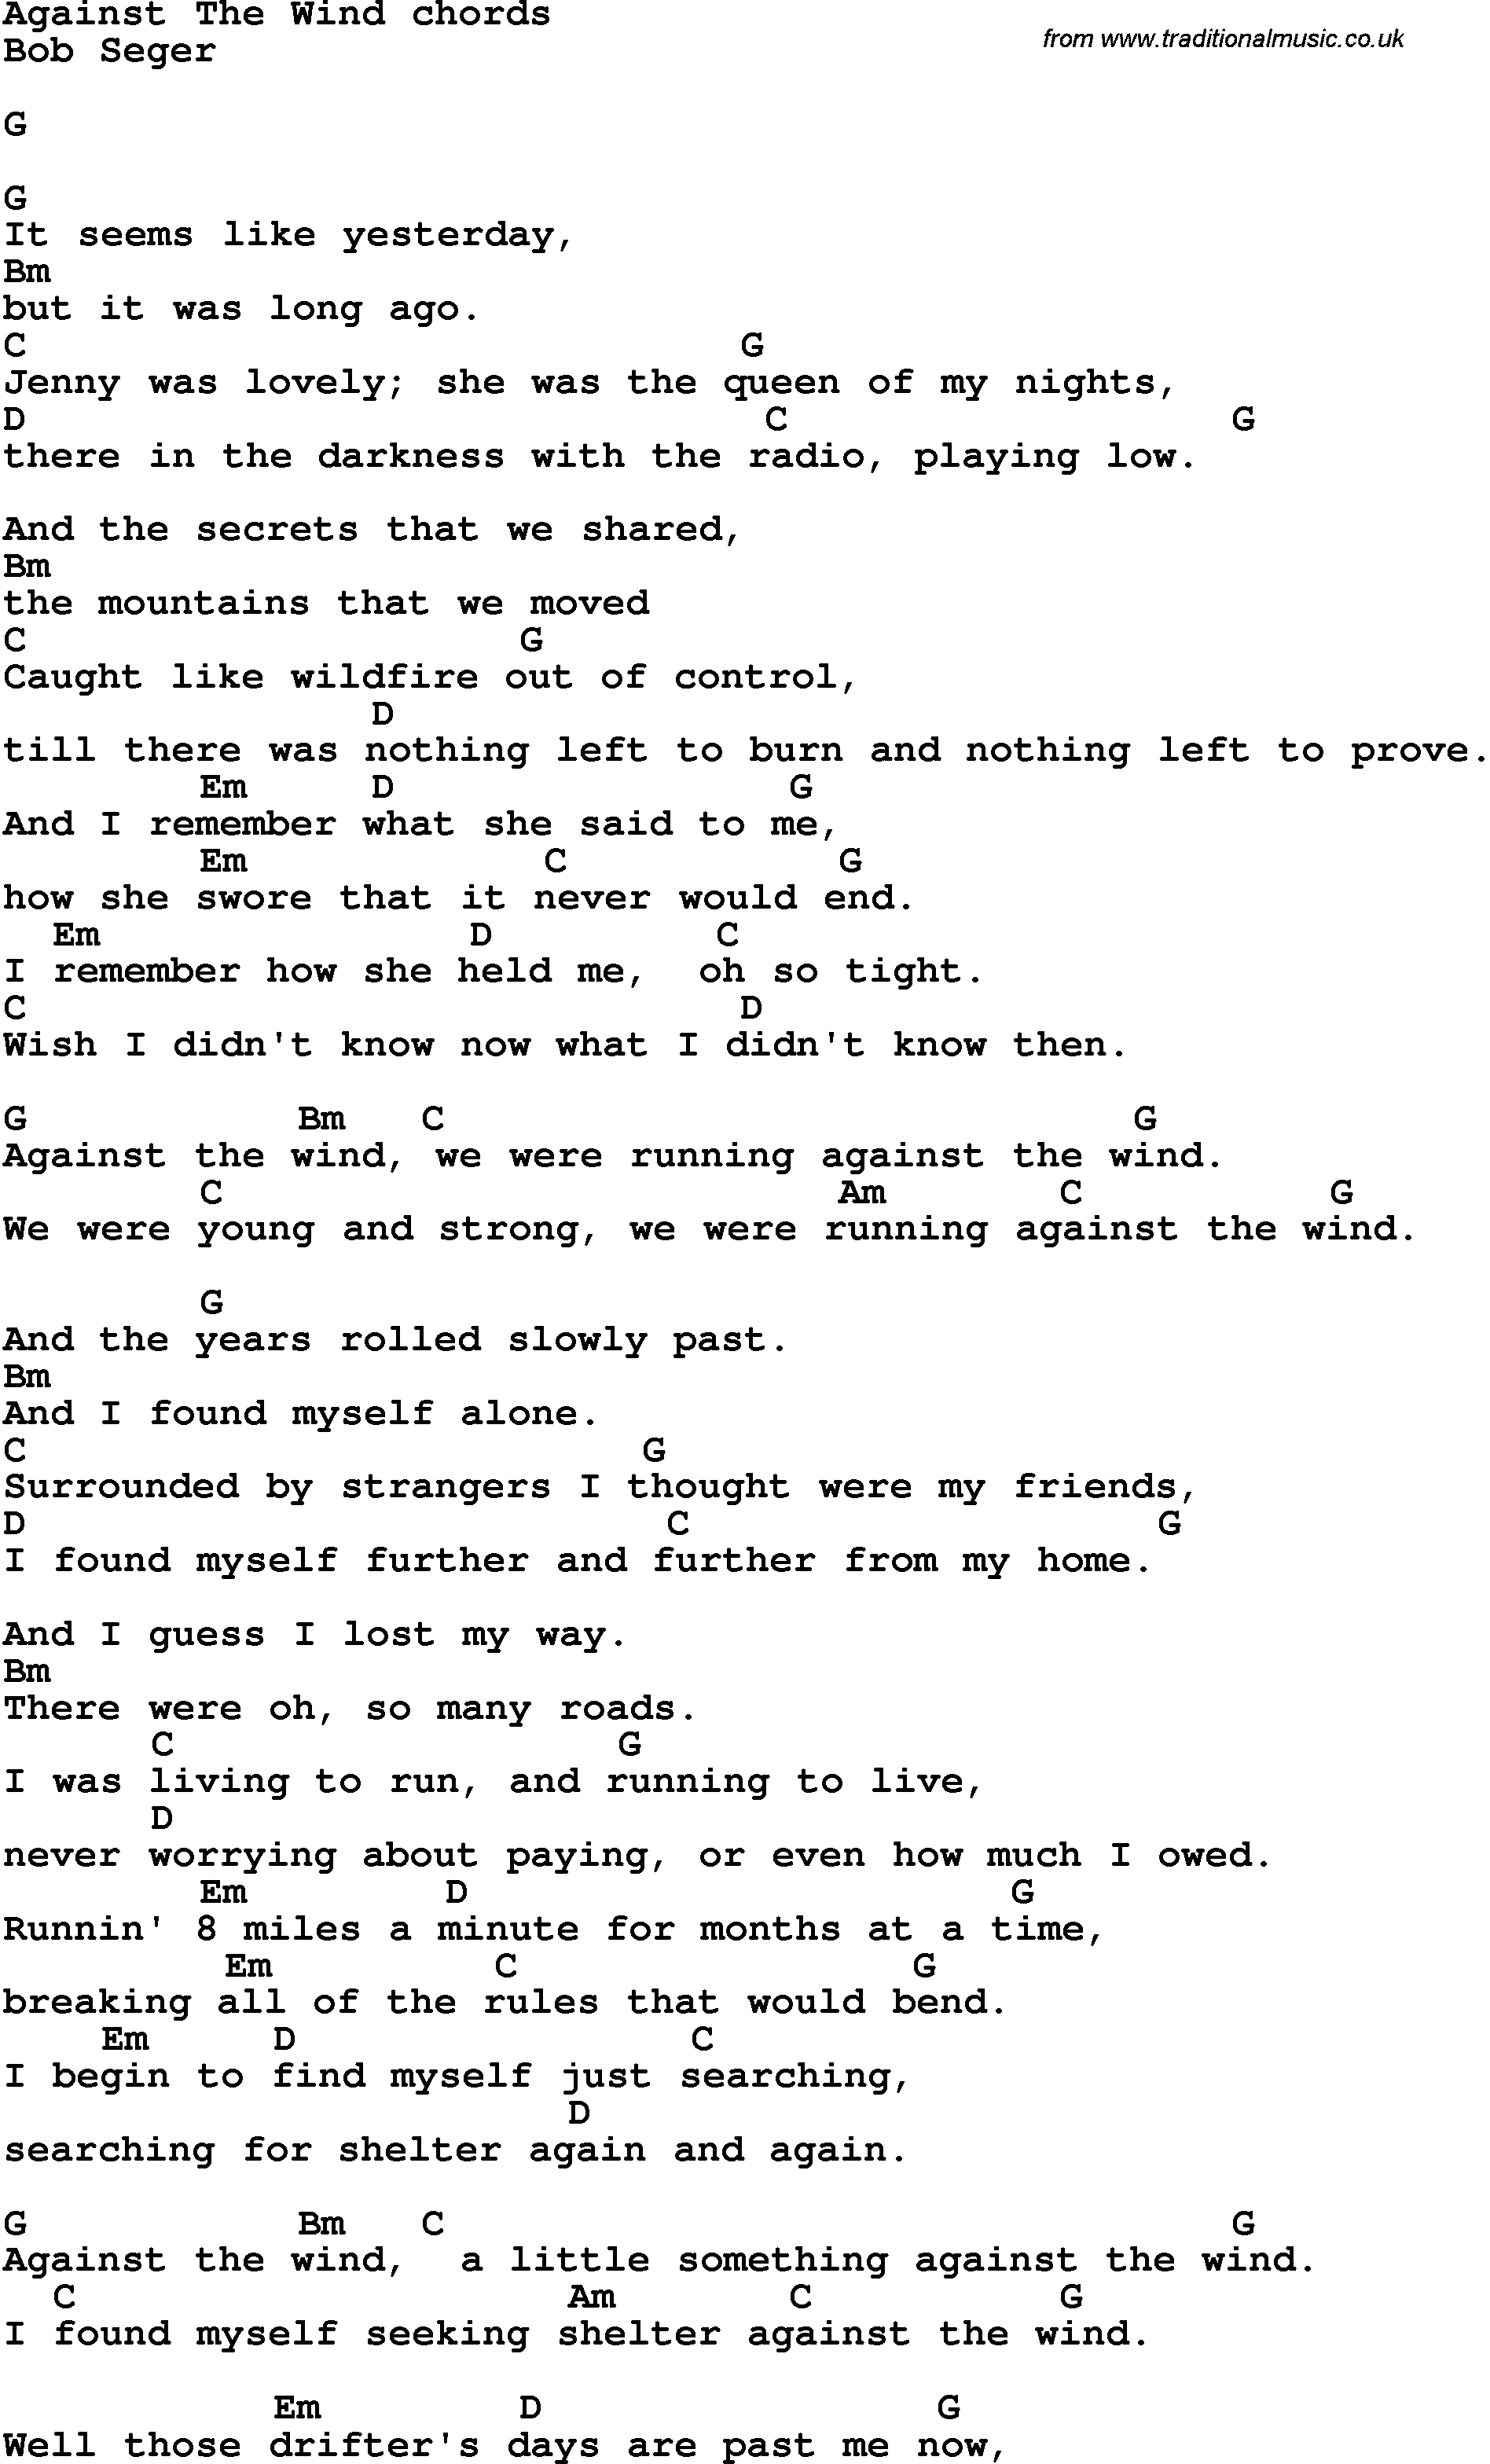 Song Lyrics with guitar chords for Against The Wind